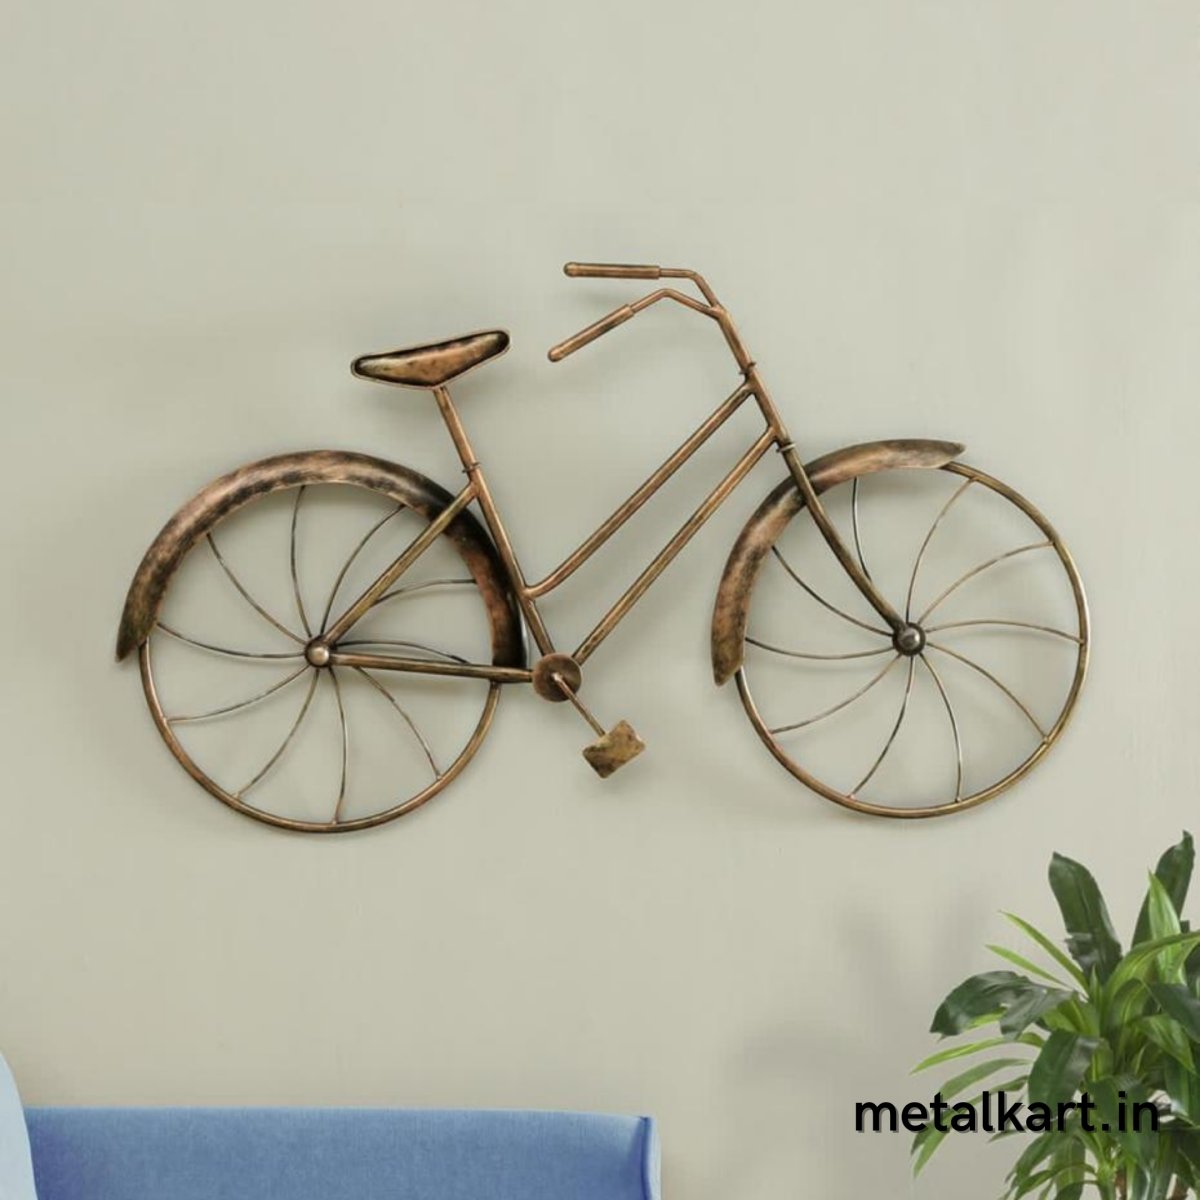 Globetrotters Handmade Vintage Cycle Wall accent (36 x 21 Inches)